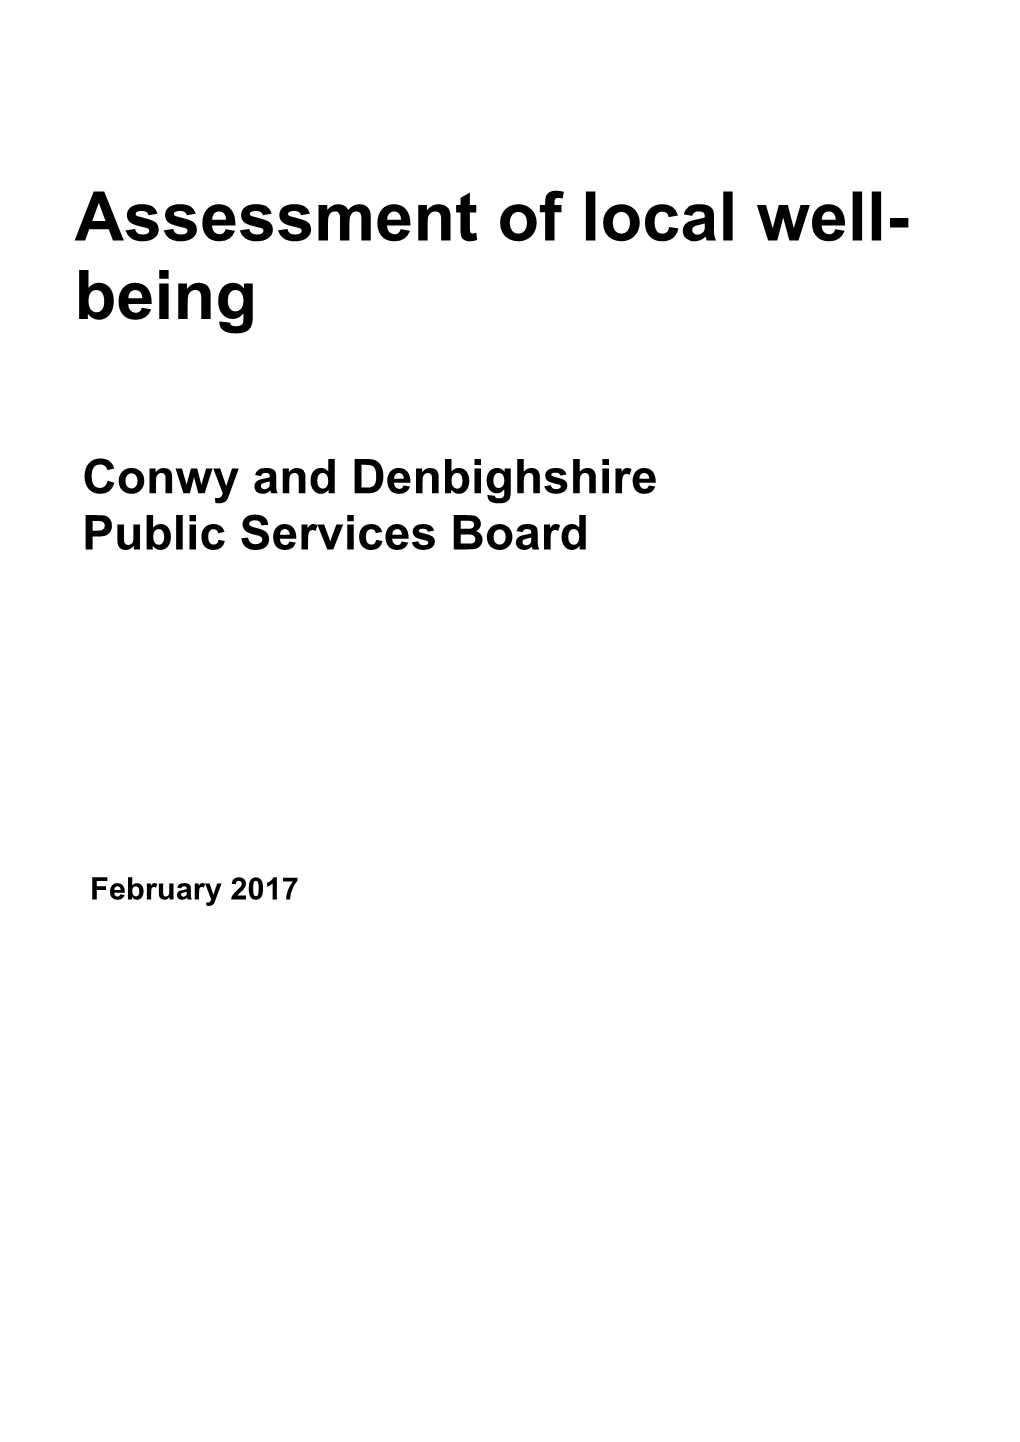 Assessment of Local Well- Being